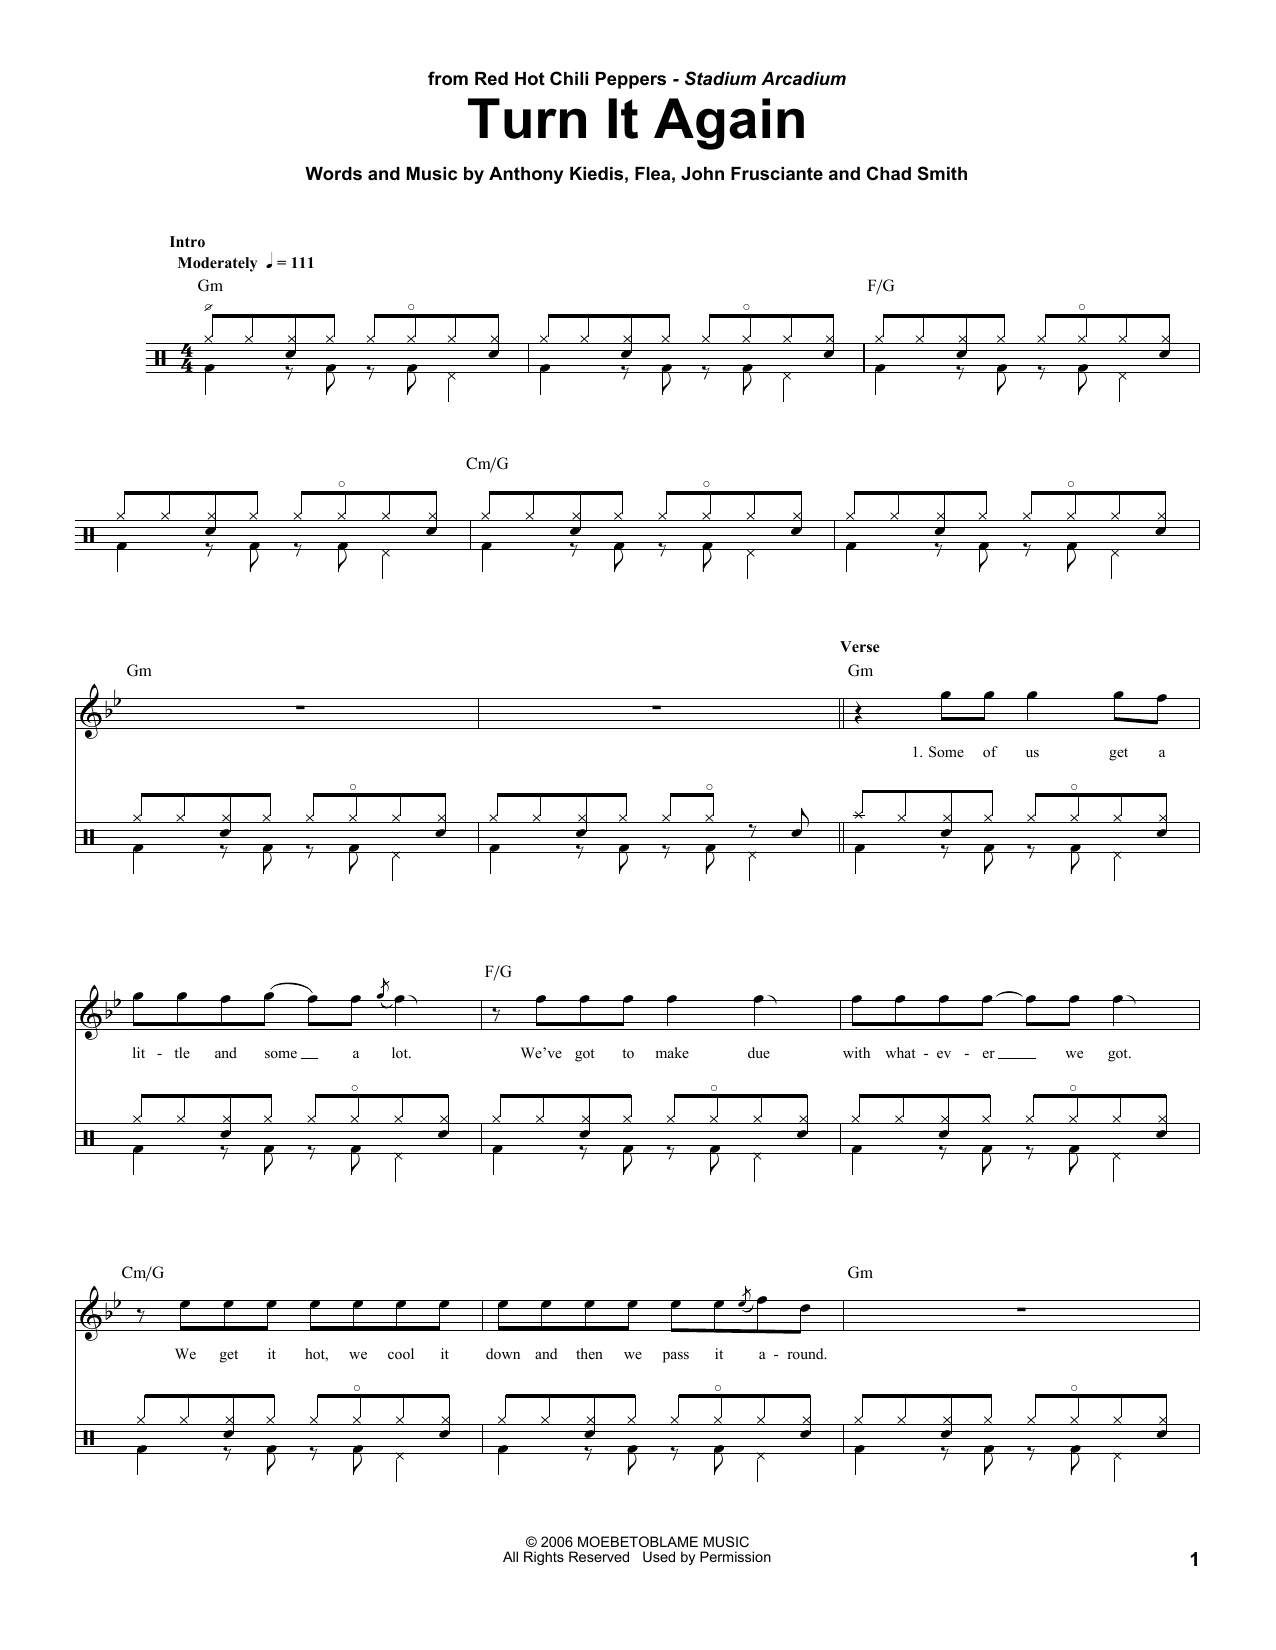 Download Red Hot Chili Peppers Turn It Again Sheet Music